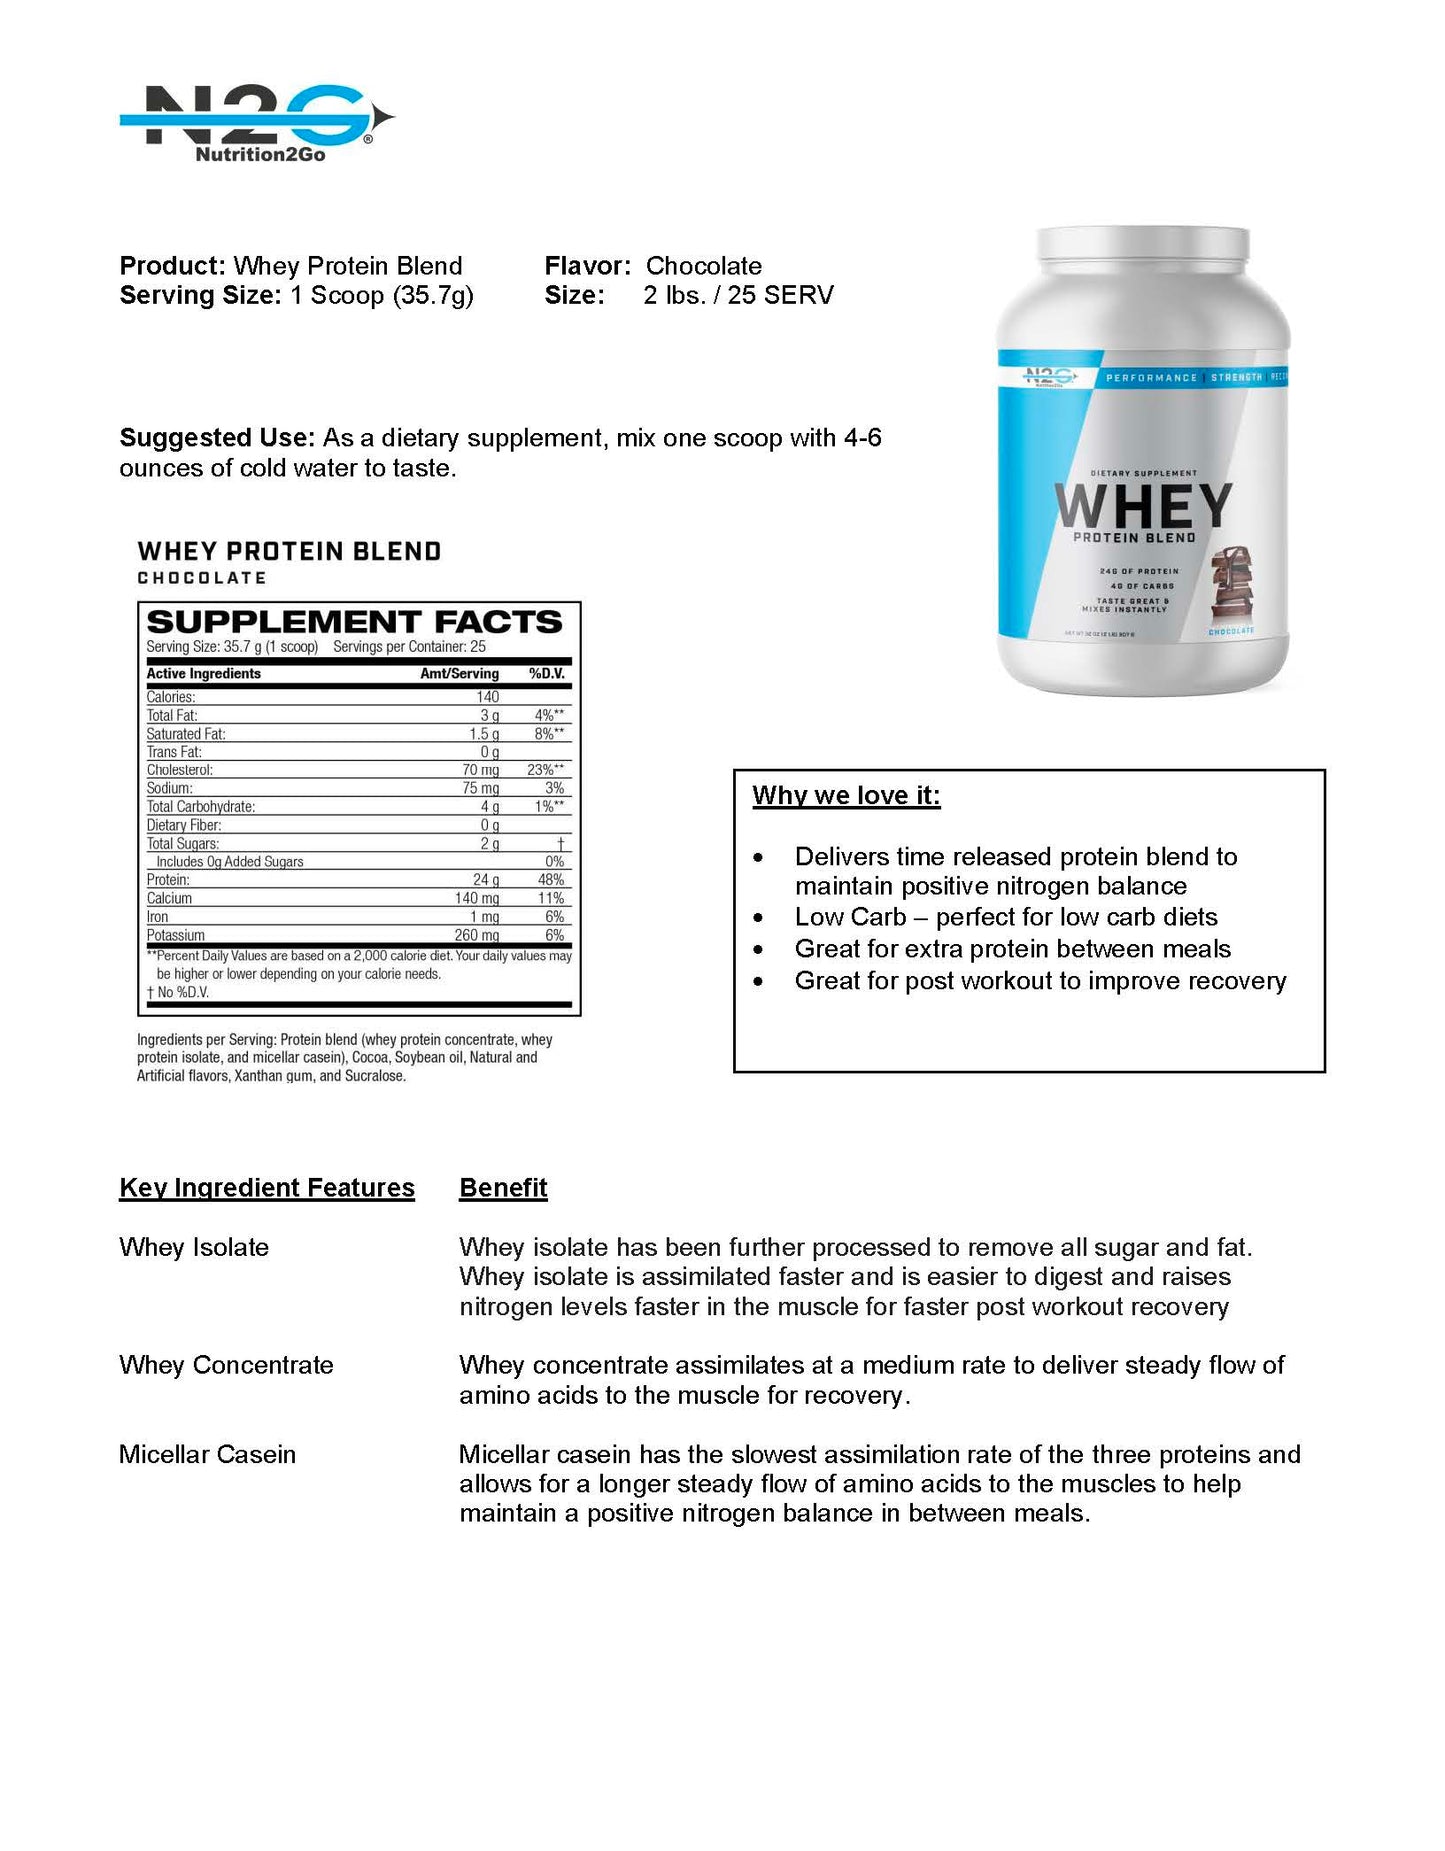 N2G Whey Protein Blend, Chocolate Fact Sheet